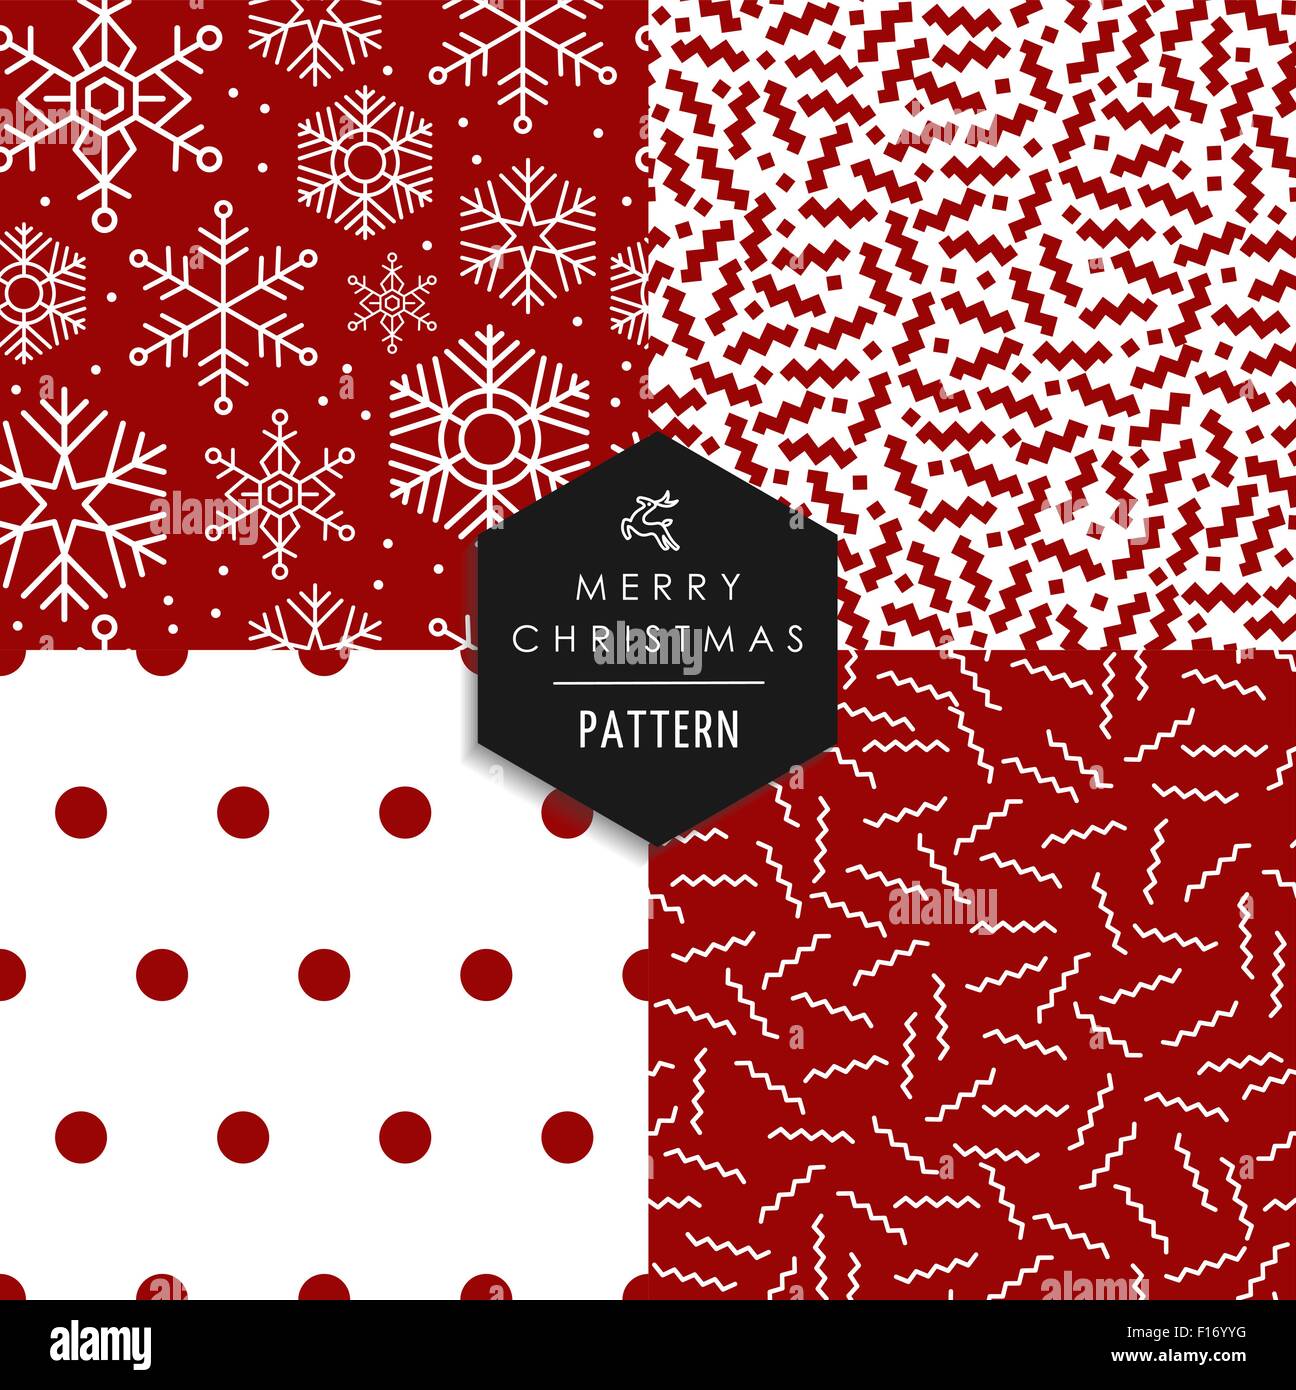 Merry Christmas hipster 80s vintage style seamless pattern set. Red white xmas backgrounds with snowflakes, lines, shapes Stock Vector